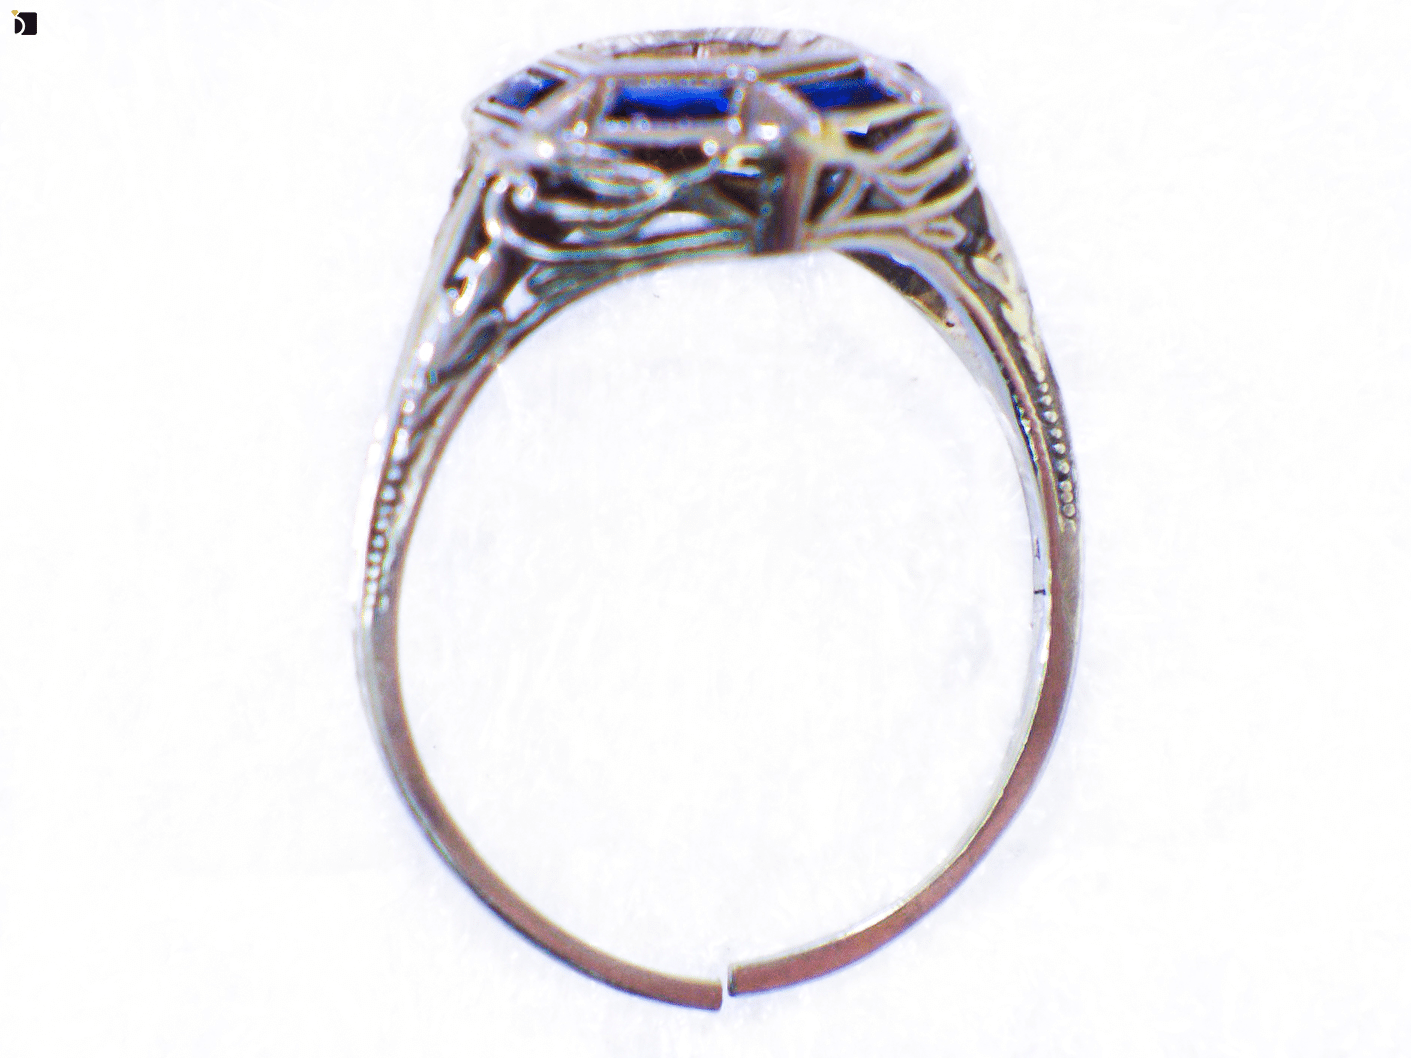 Image showing the Before #123 Flat View of a Ring with Baguette Blue Sapphire and Green Sapphire Gemstone Replacement